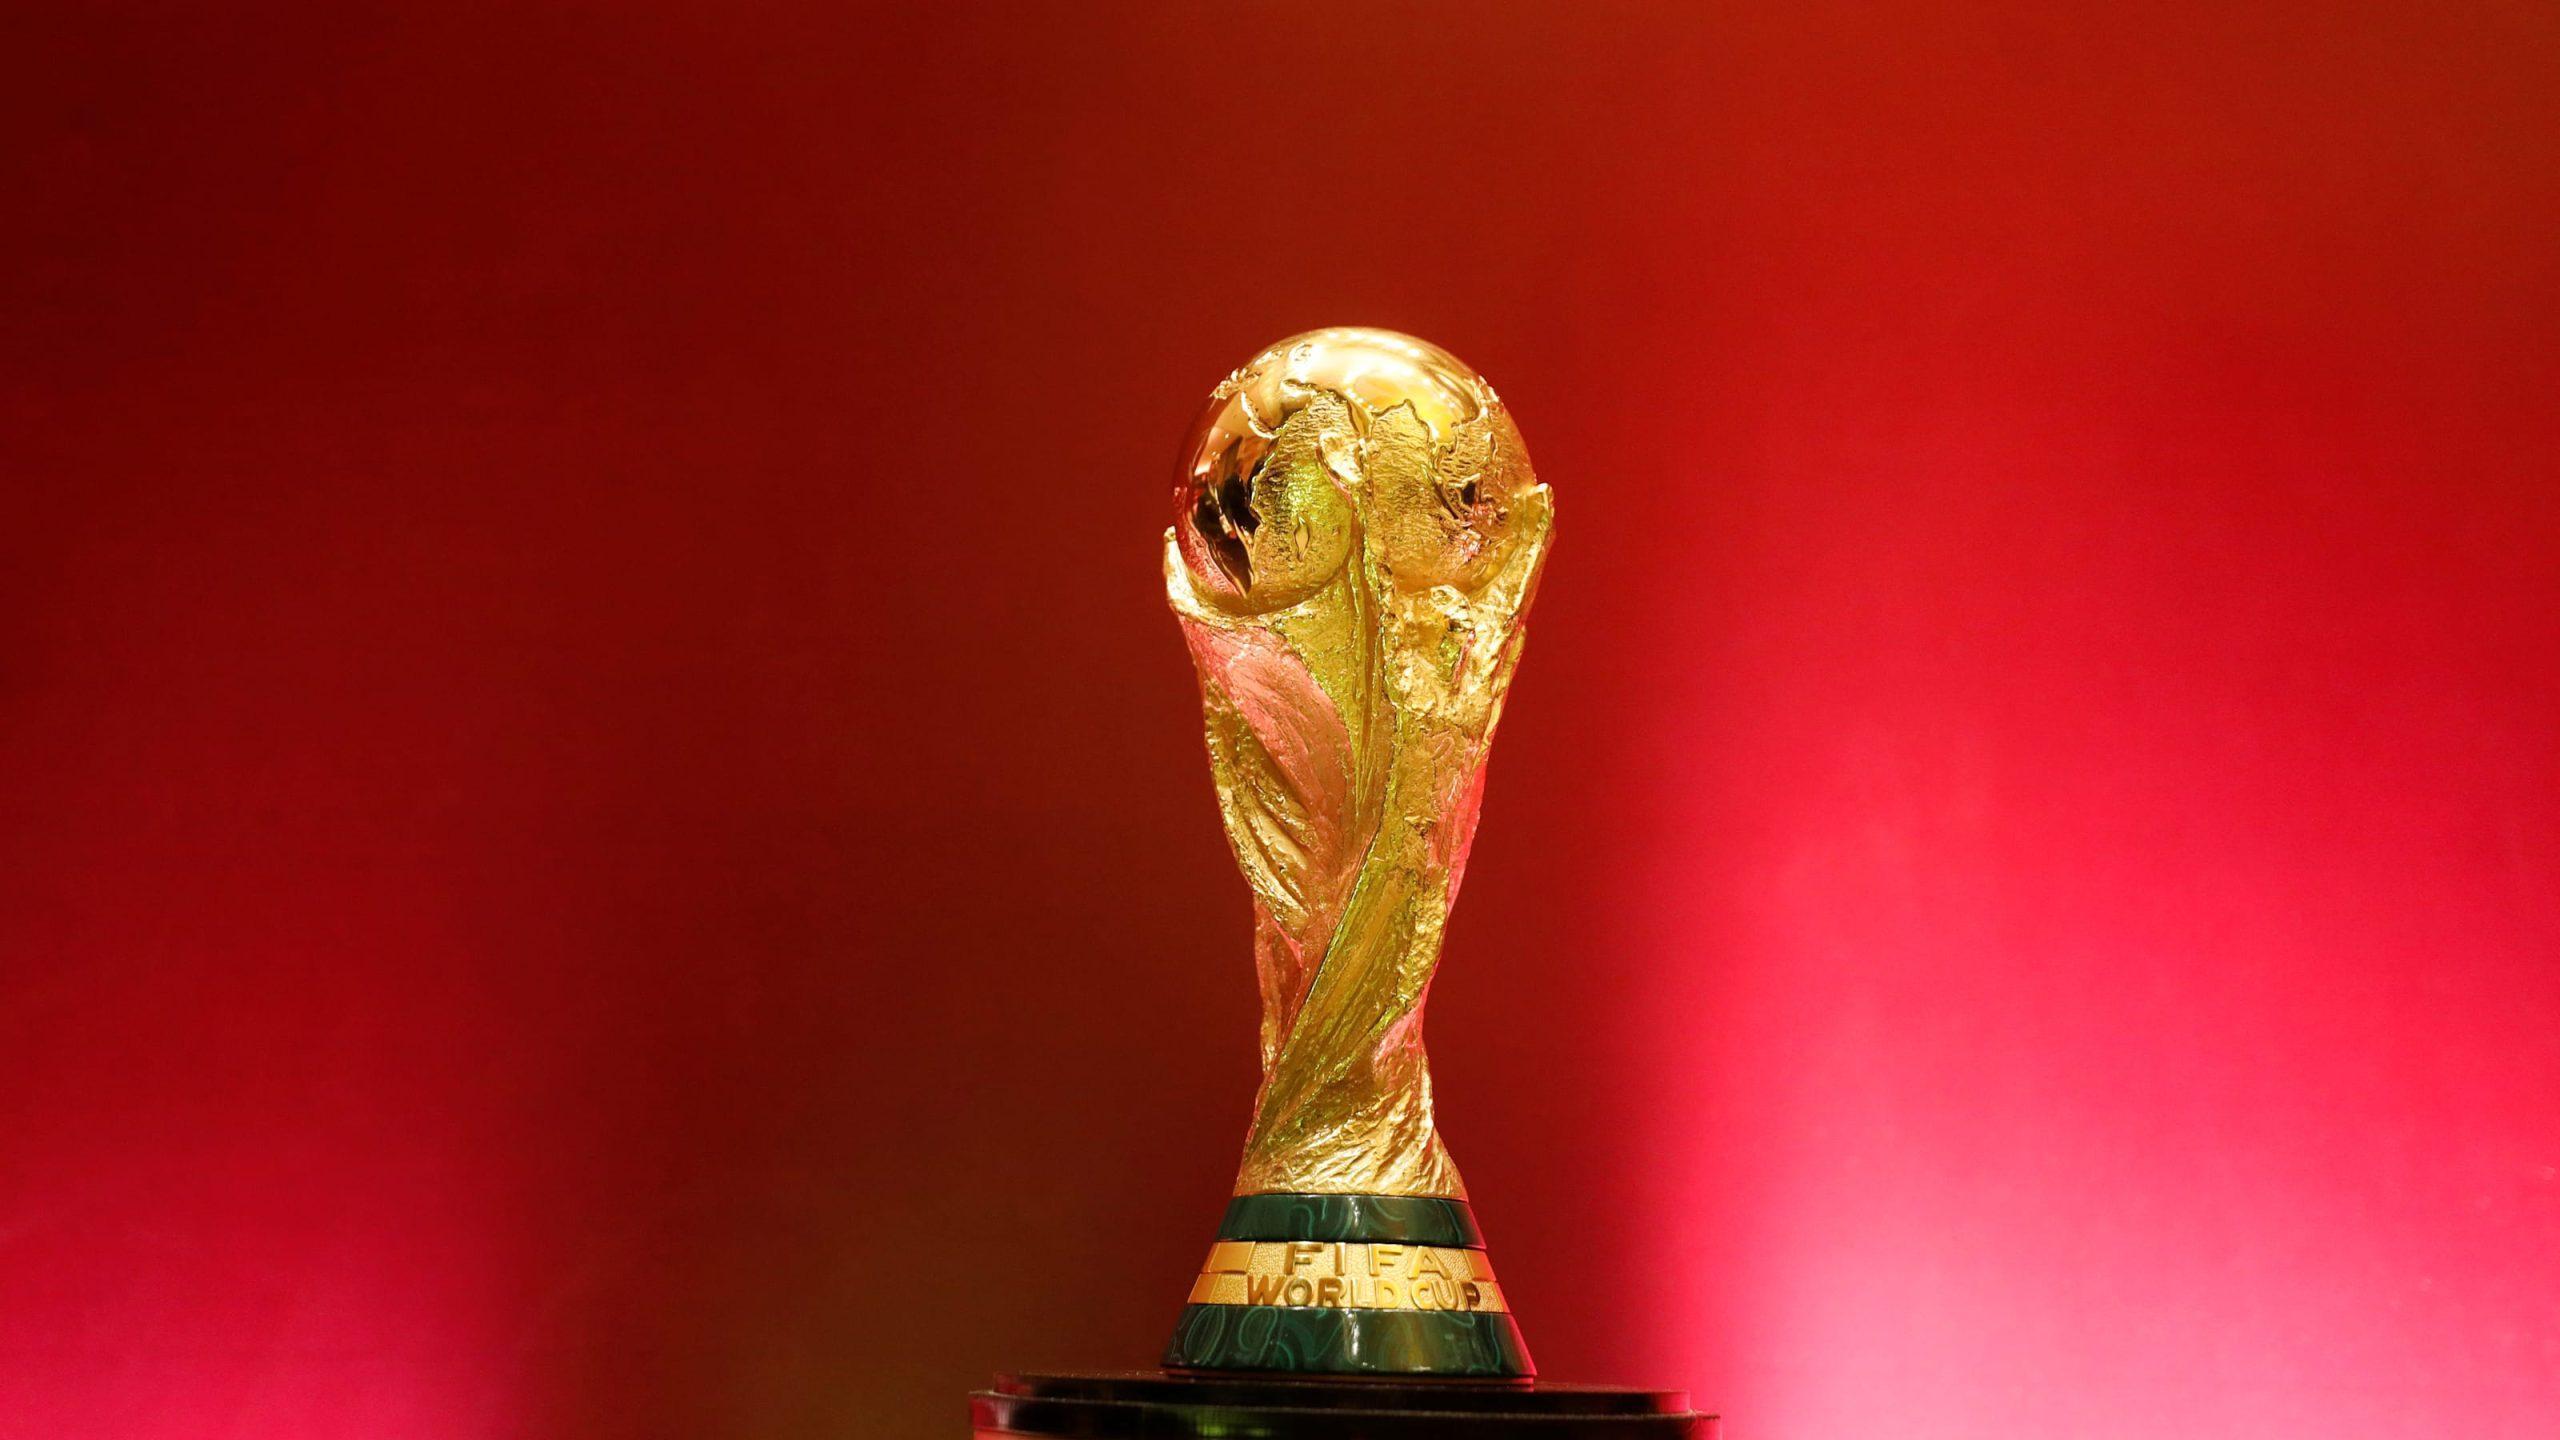 How will the FIFA World Cup affect club football this year? - Dazeinfo